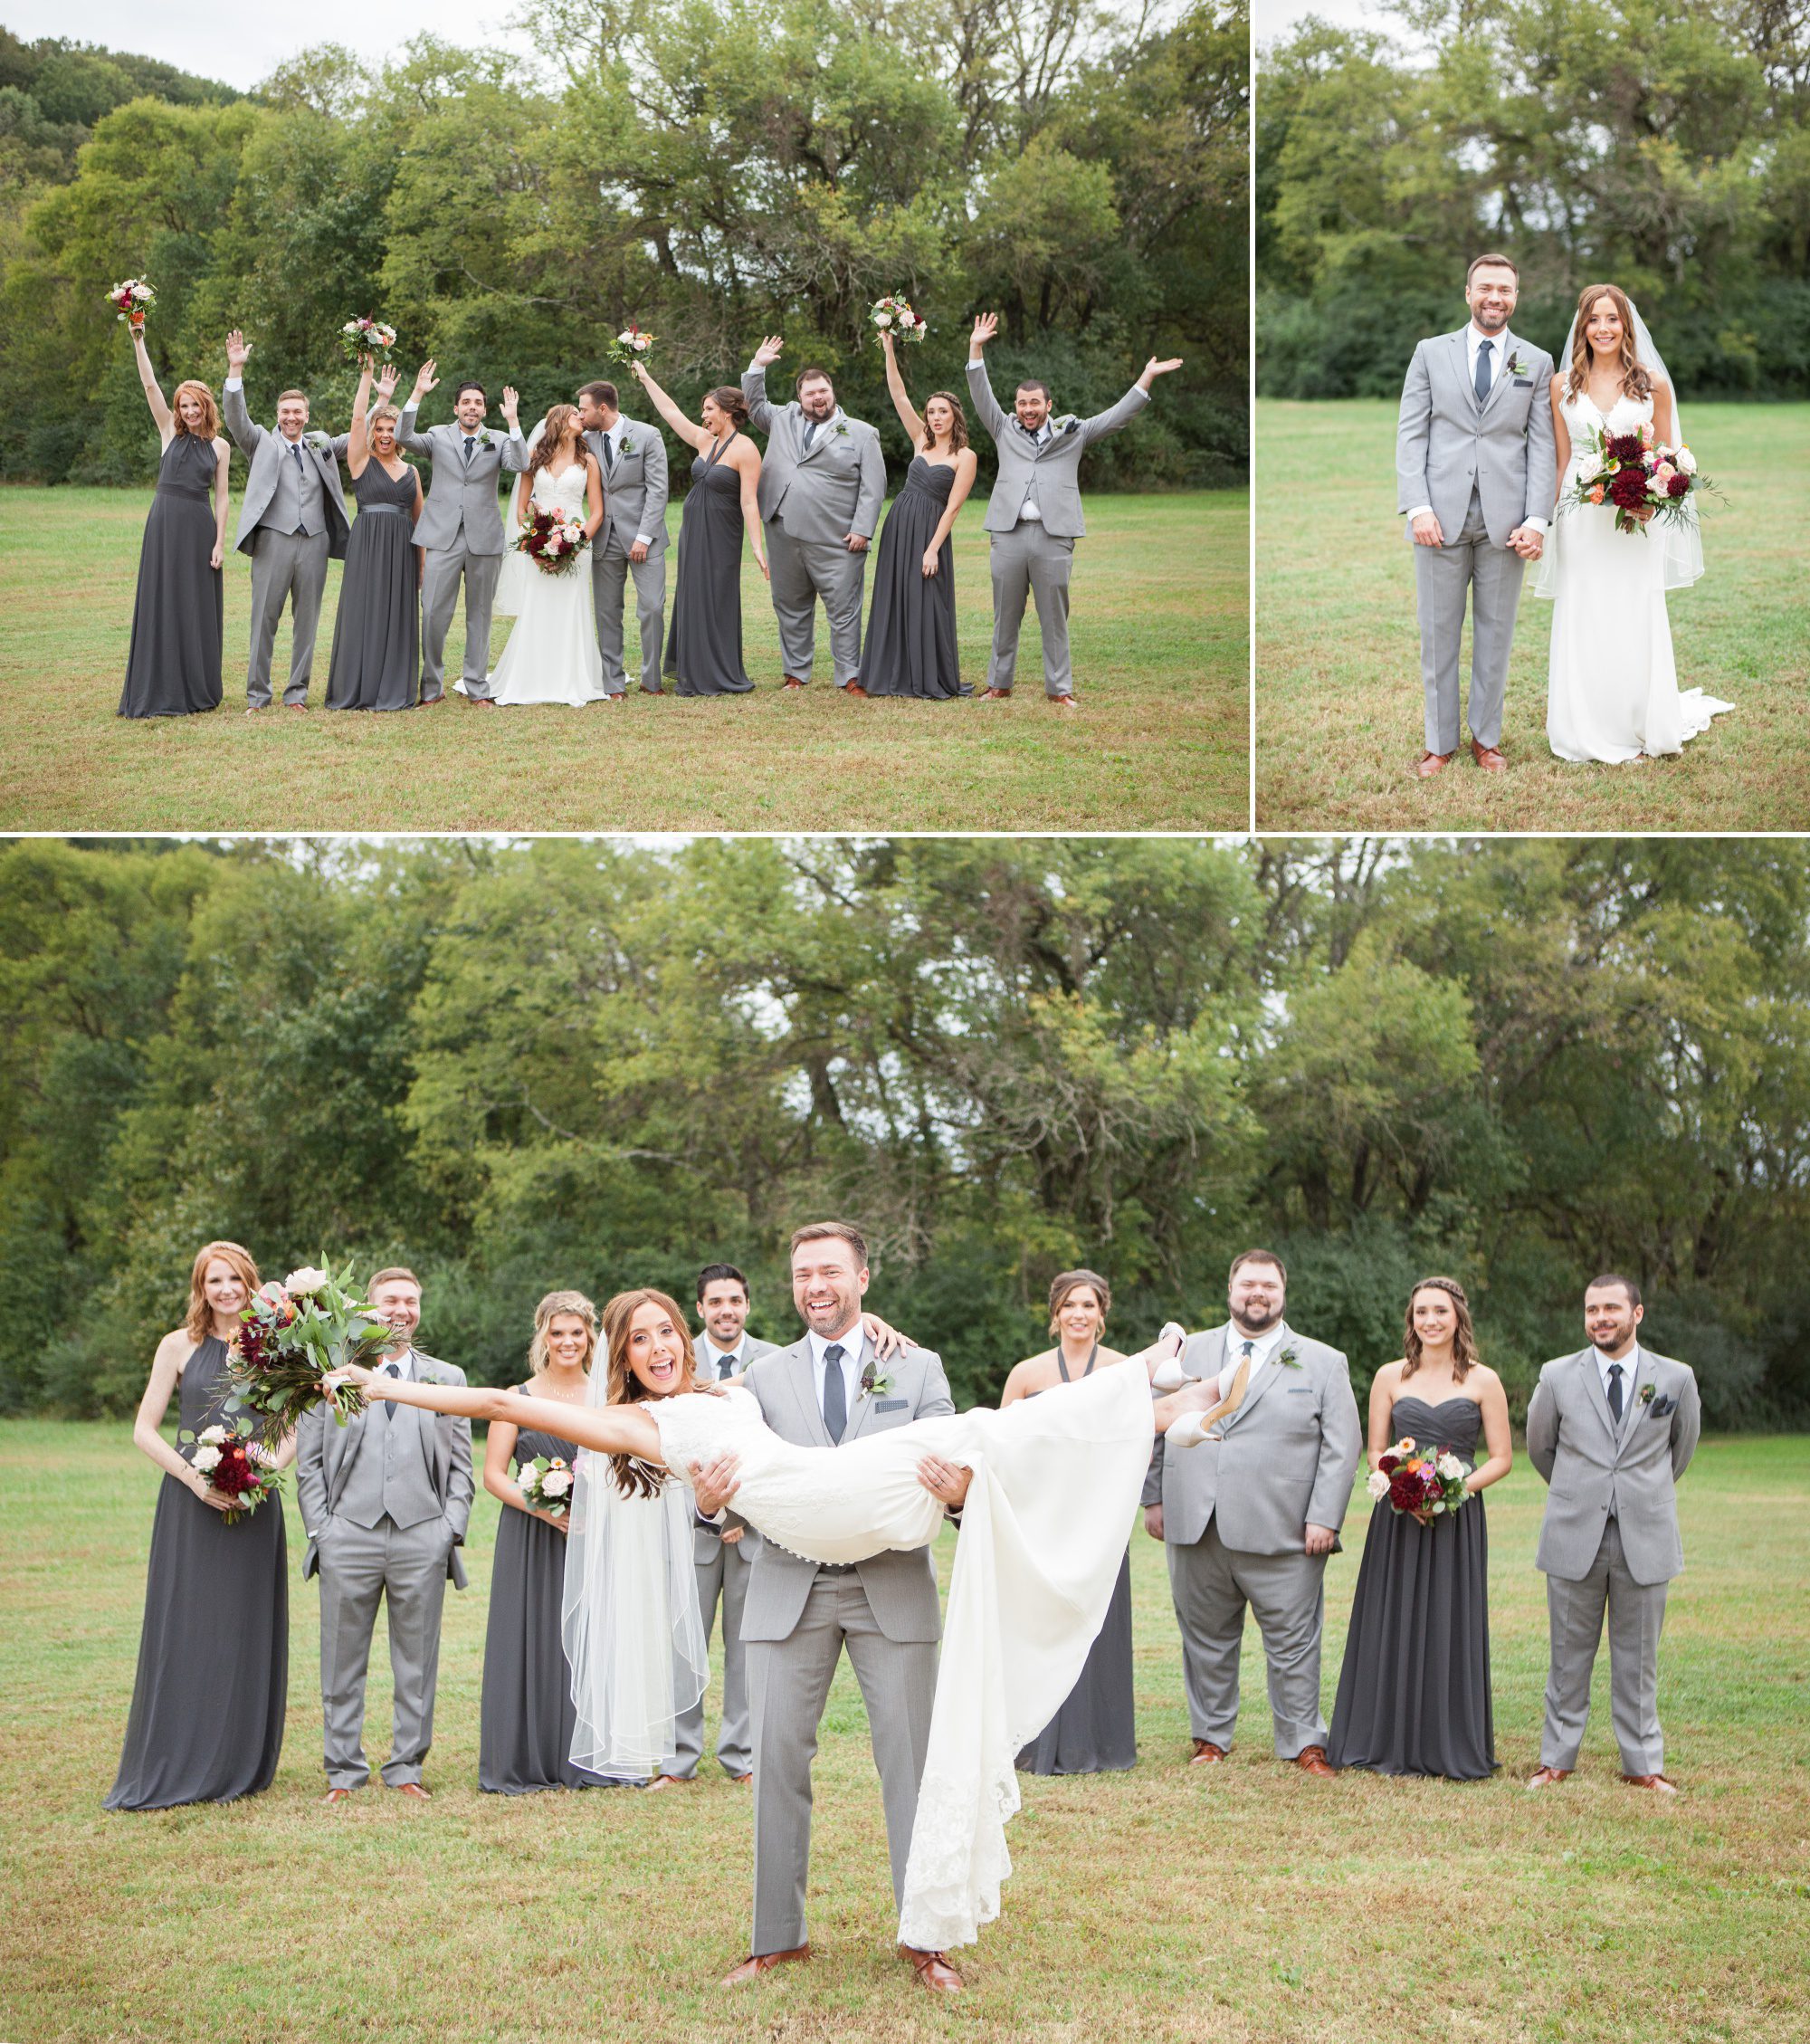 Bridal party photography after wedding ceremony at Green Door Gourmet wedding in Nashville, TN